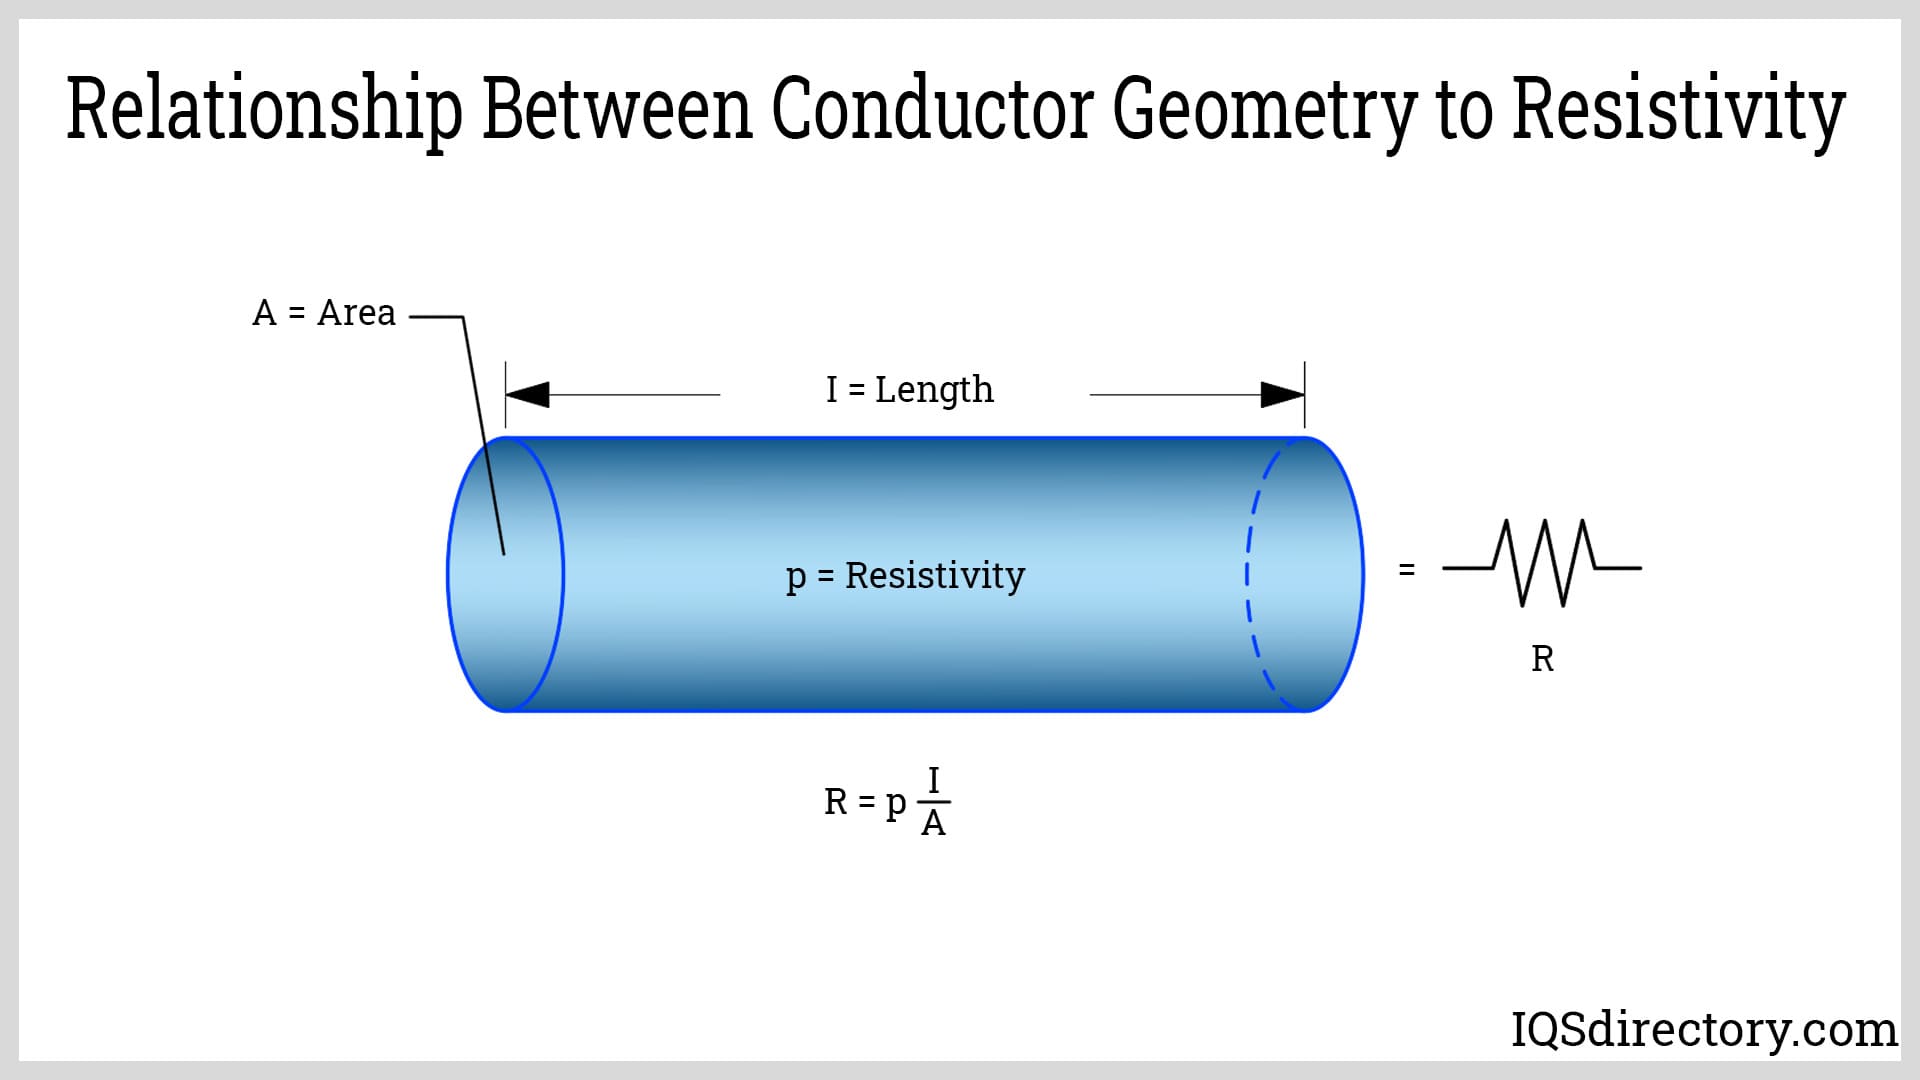 Relationship Between Conductor Geometry to Resistivity